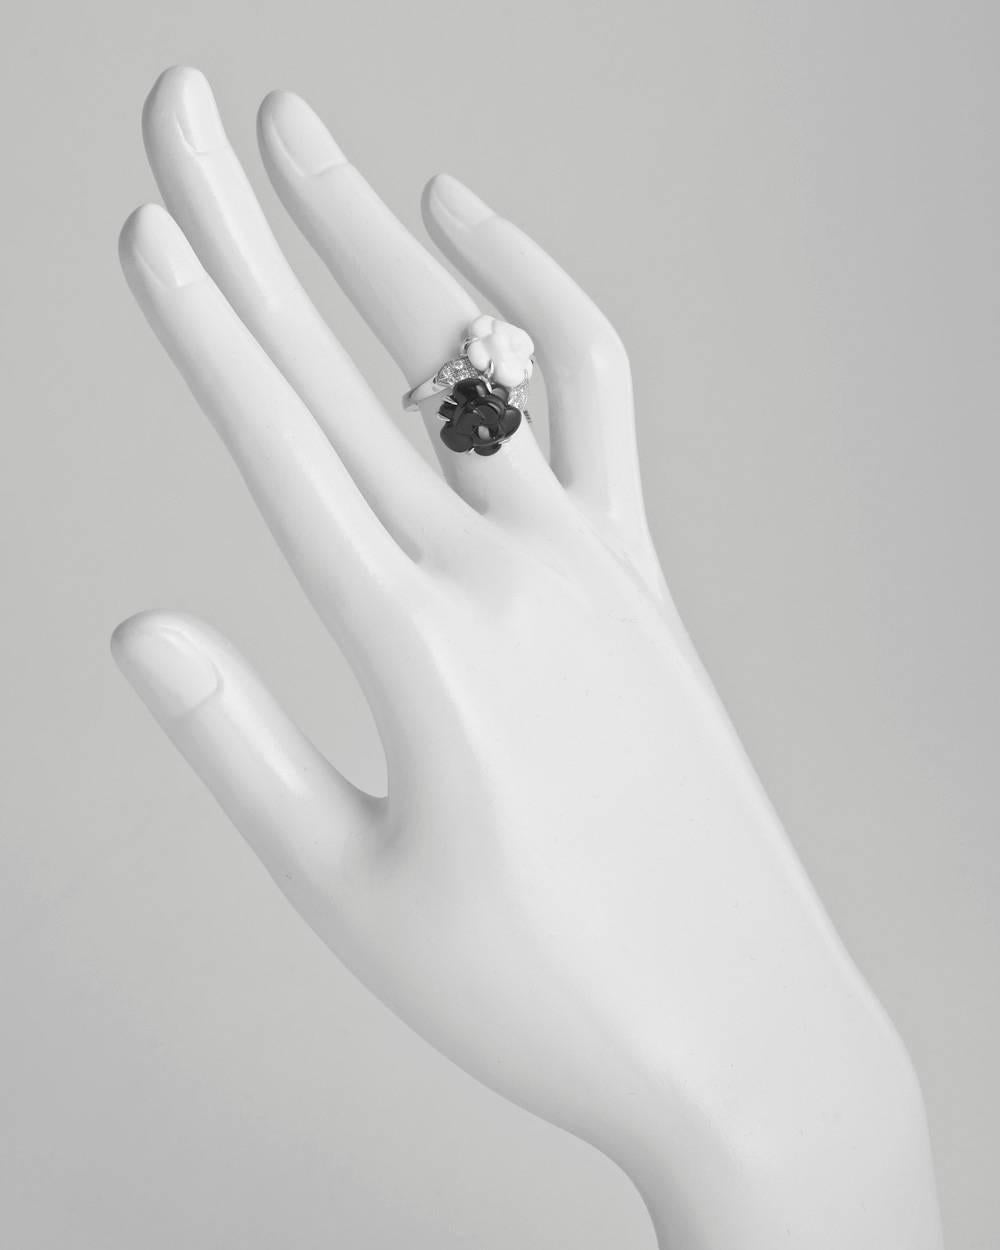 Twin camélia ring, centering two camélia flowers of carved black onyx and carved white agate with diamond set leaves, in 18k white gold, signed Chanel. Ring size 4.75.

Current retail is $3,650